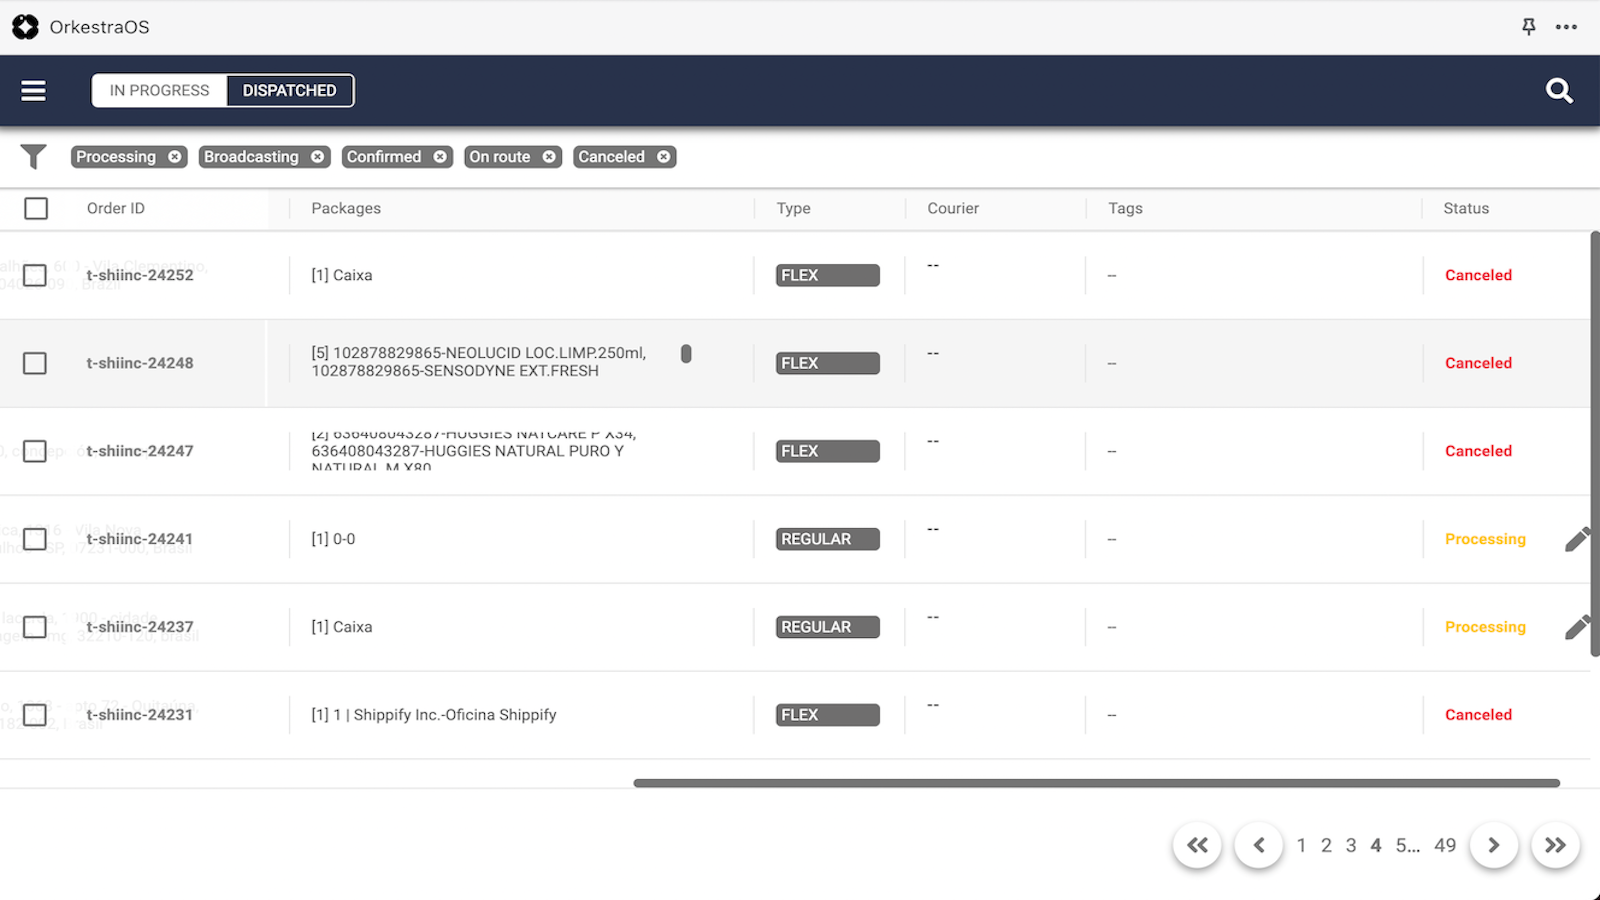 View online reports with orders status